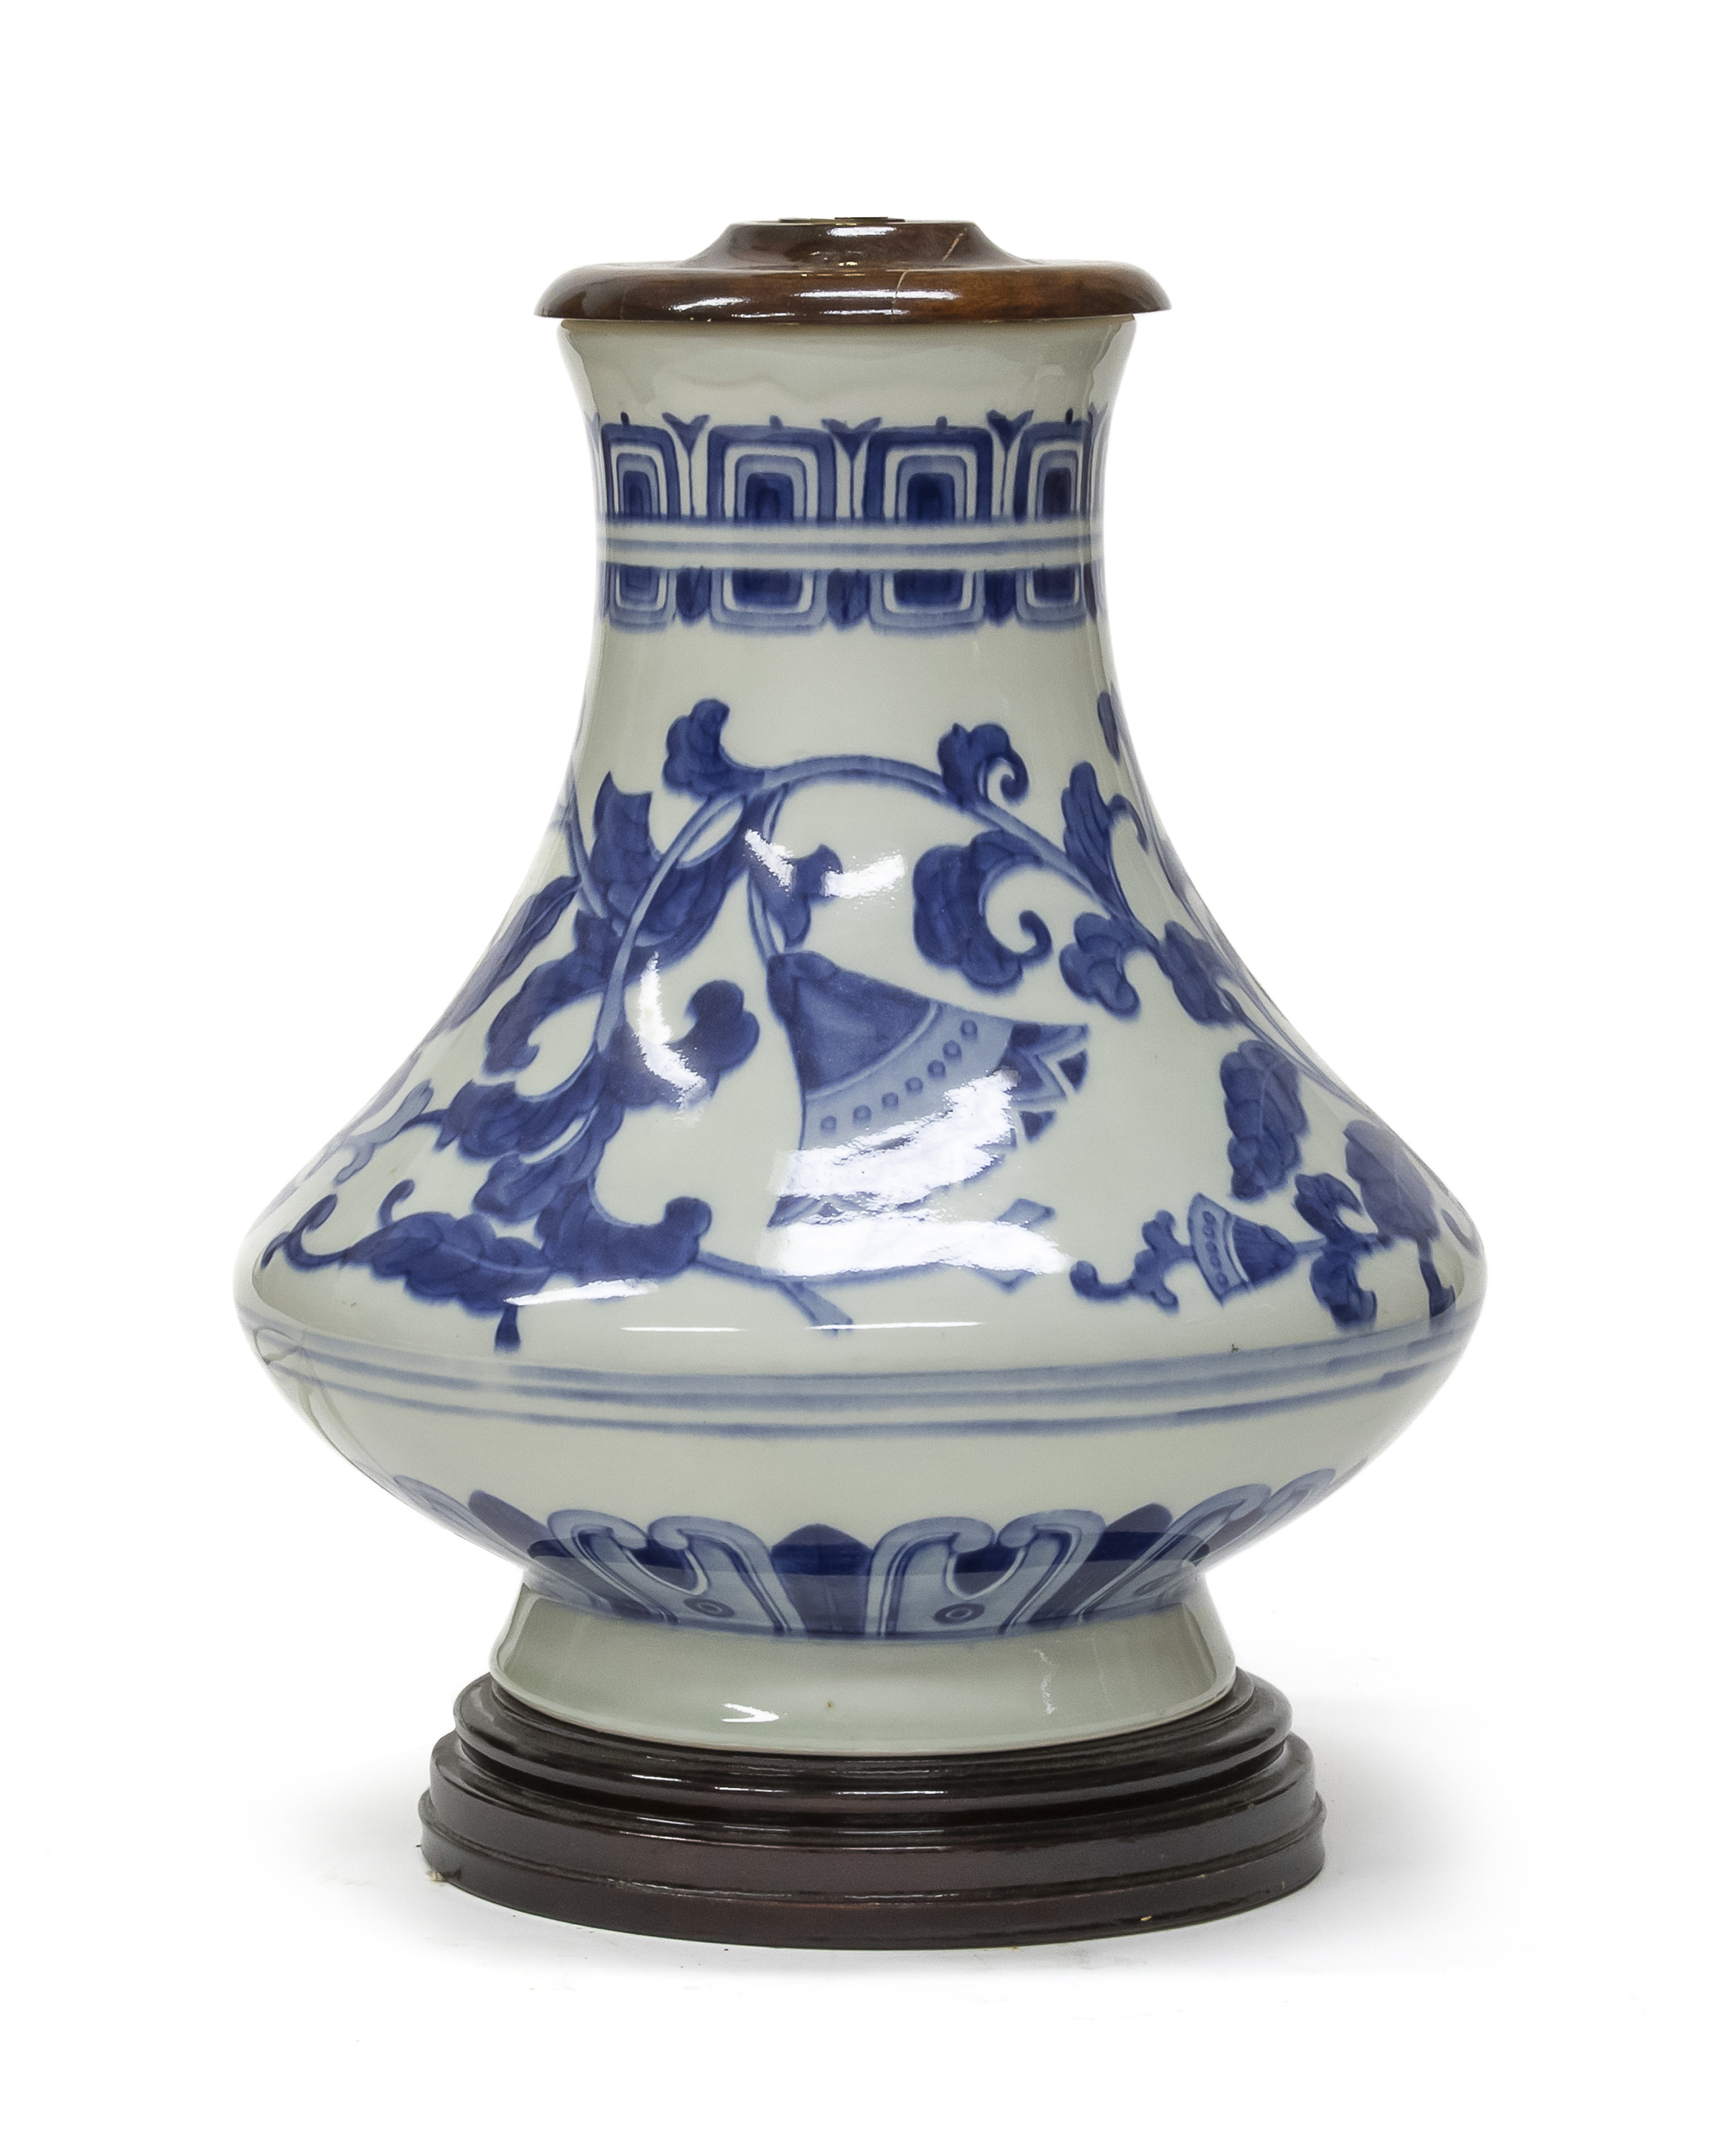 A CHINESE WHITE AND BLUE PORCELAIN VASE. 20TH CENTURY. ADAPTED TO LIGHT.